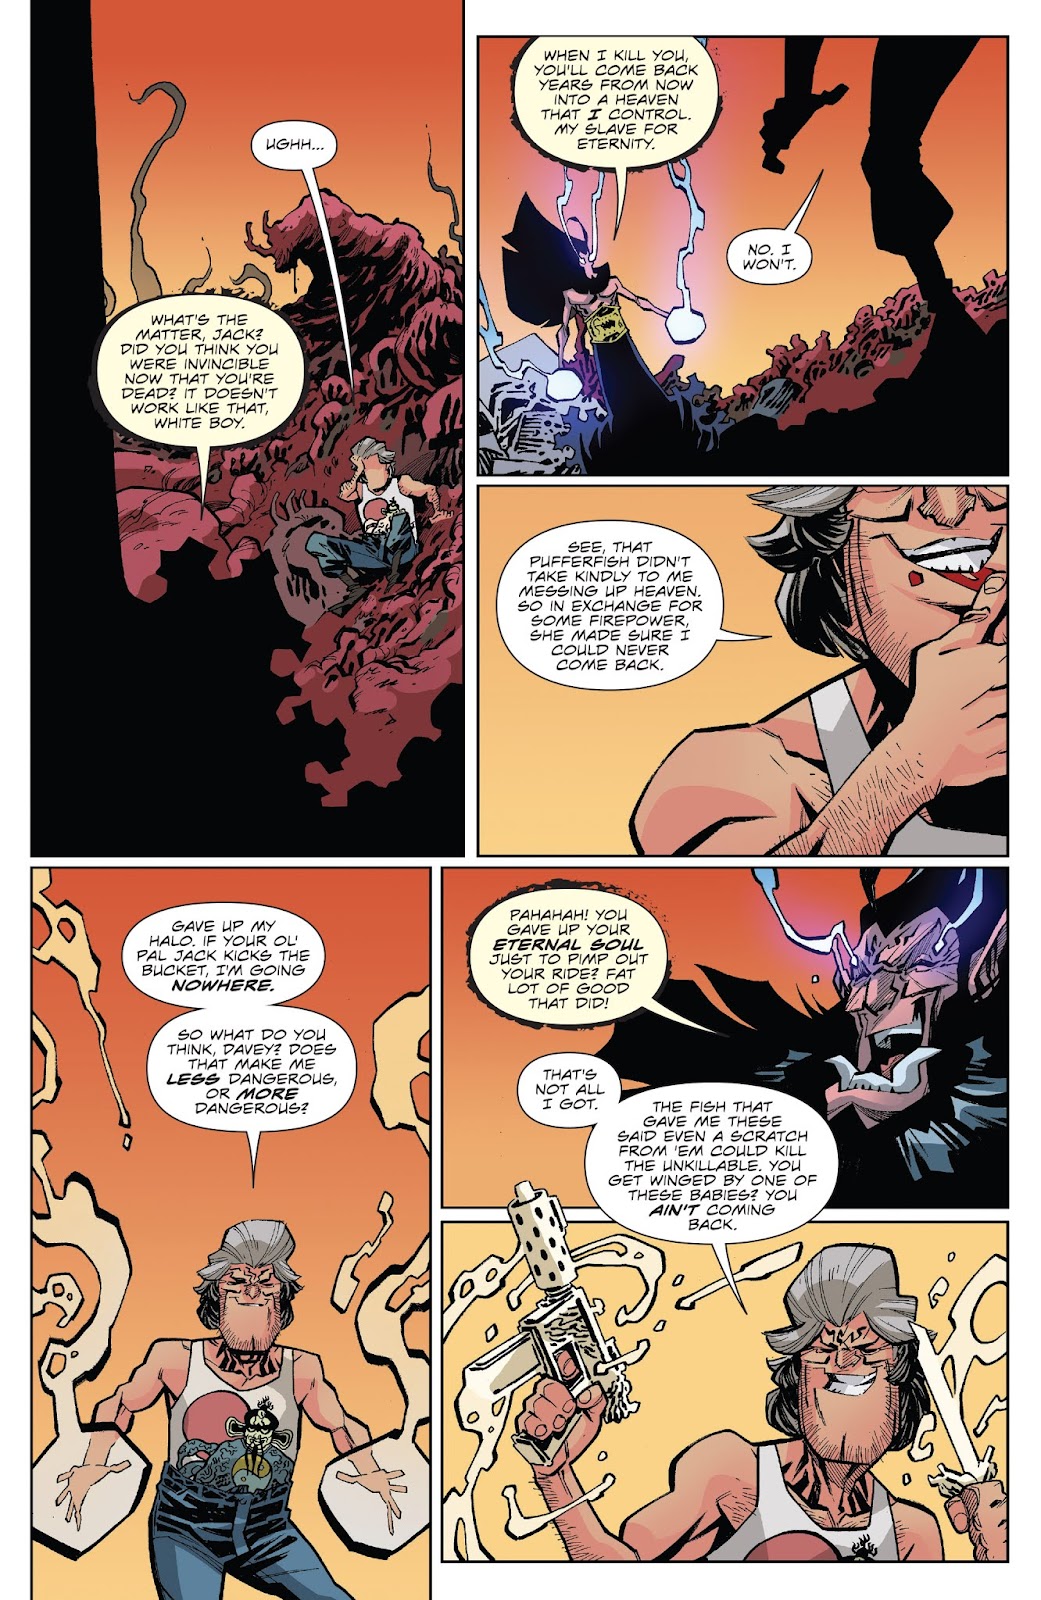 Big Trouble in Little China: Old Man Jack issue 11 - Page 19